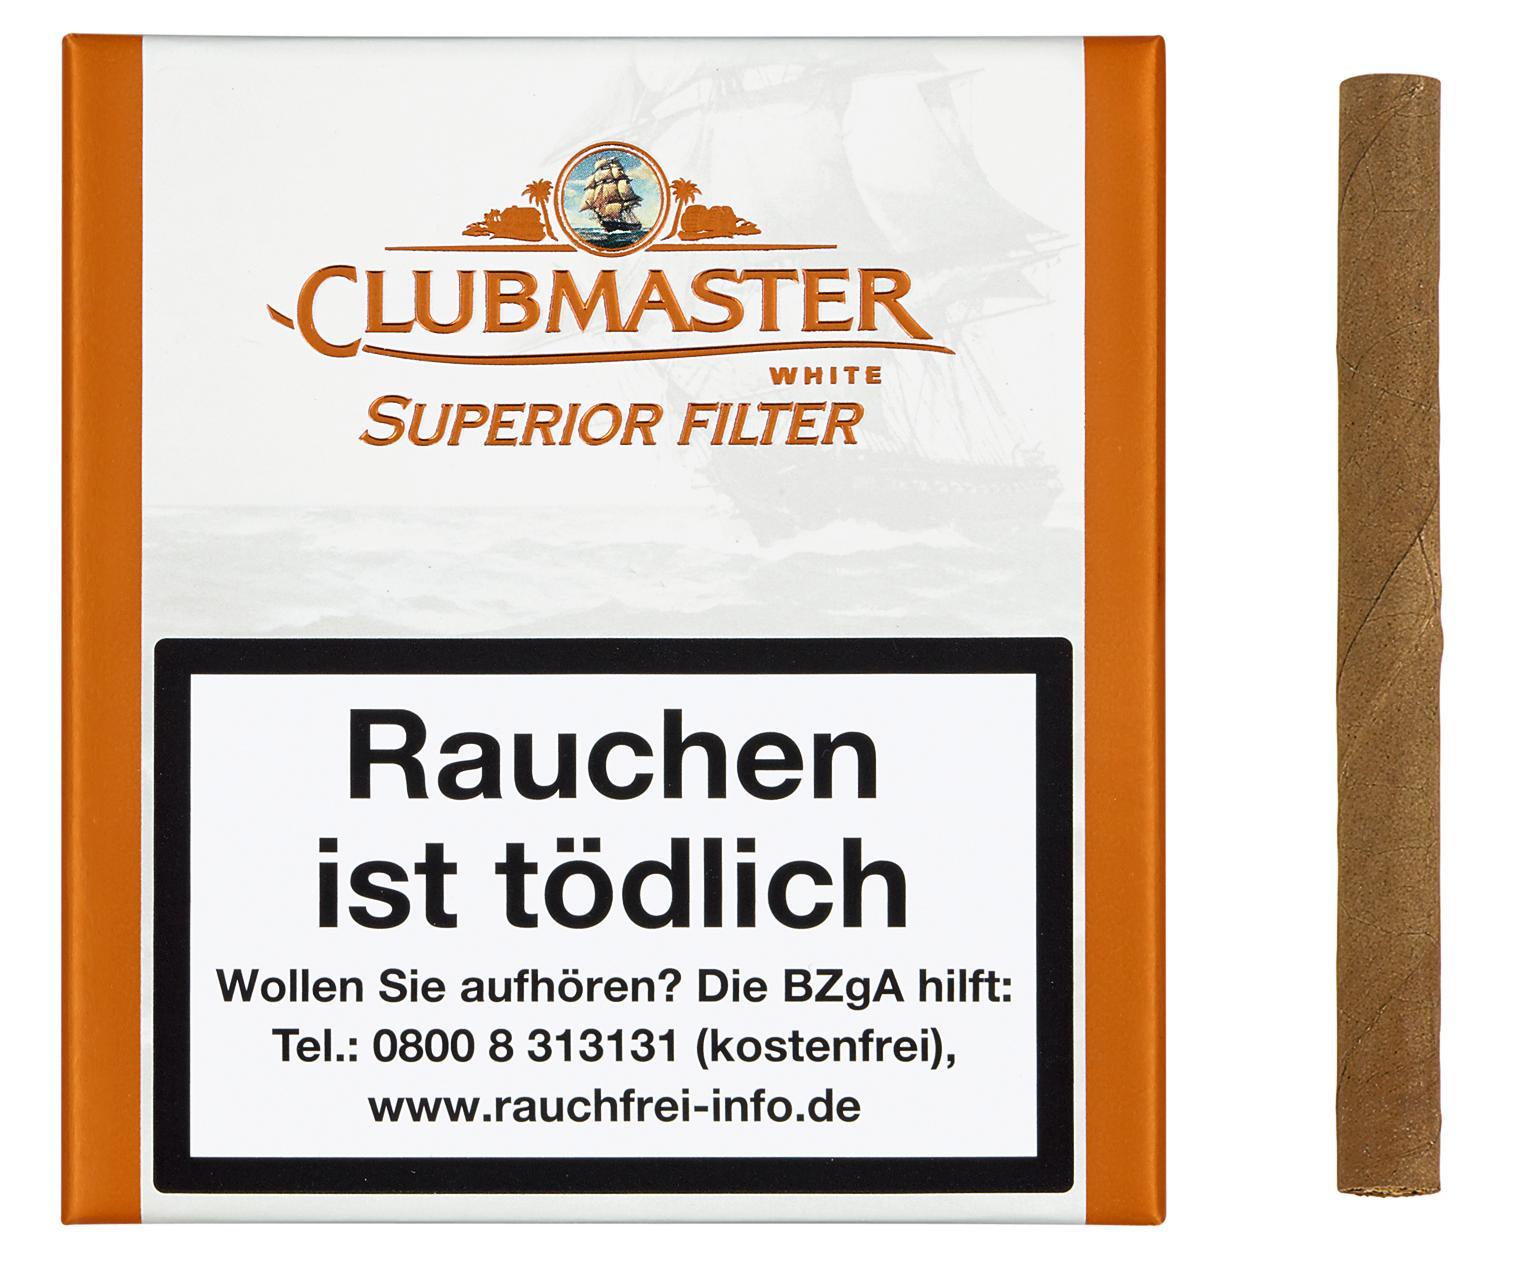 Clubmaster Superior Filter White Nr. 178 5 x 20 Zigarillos